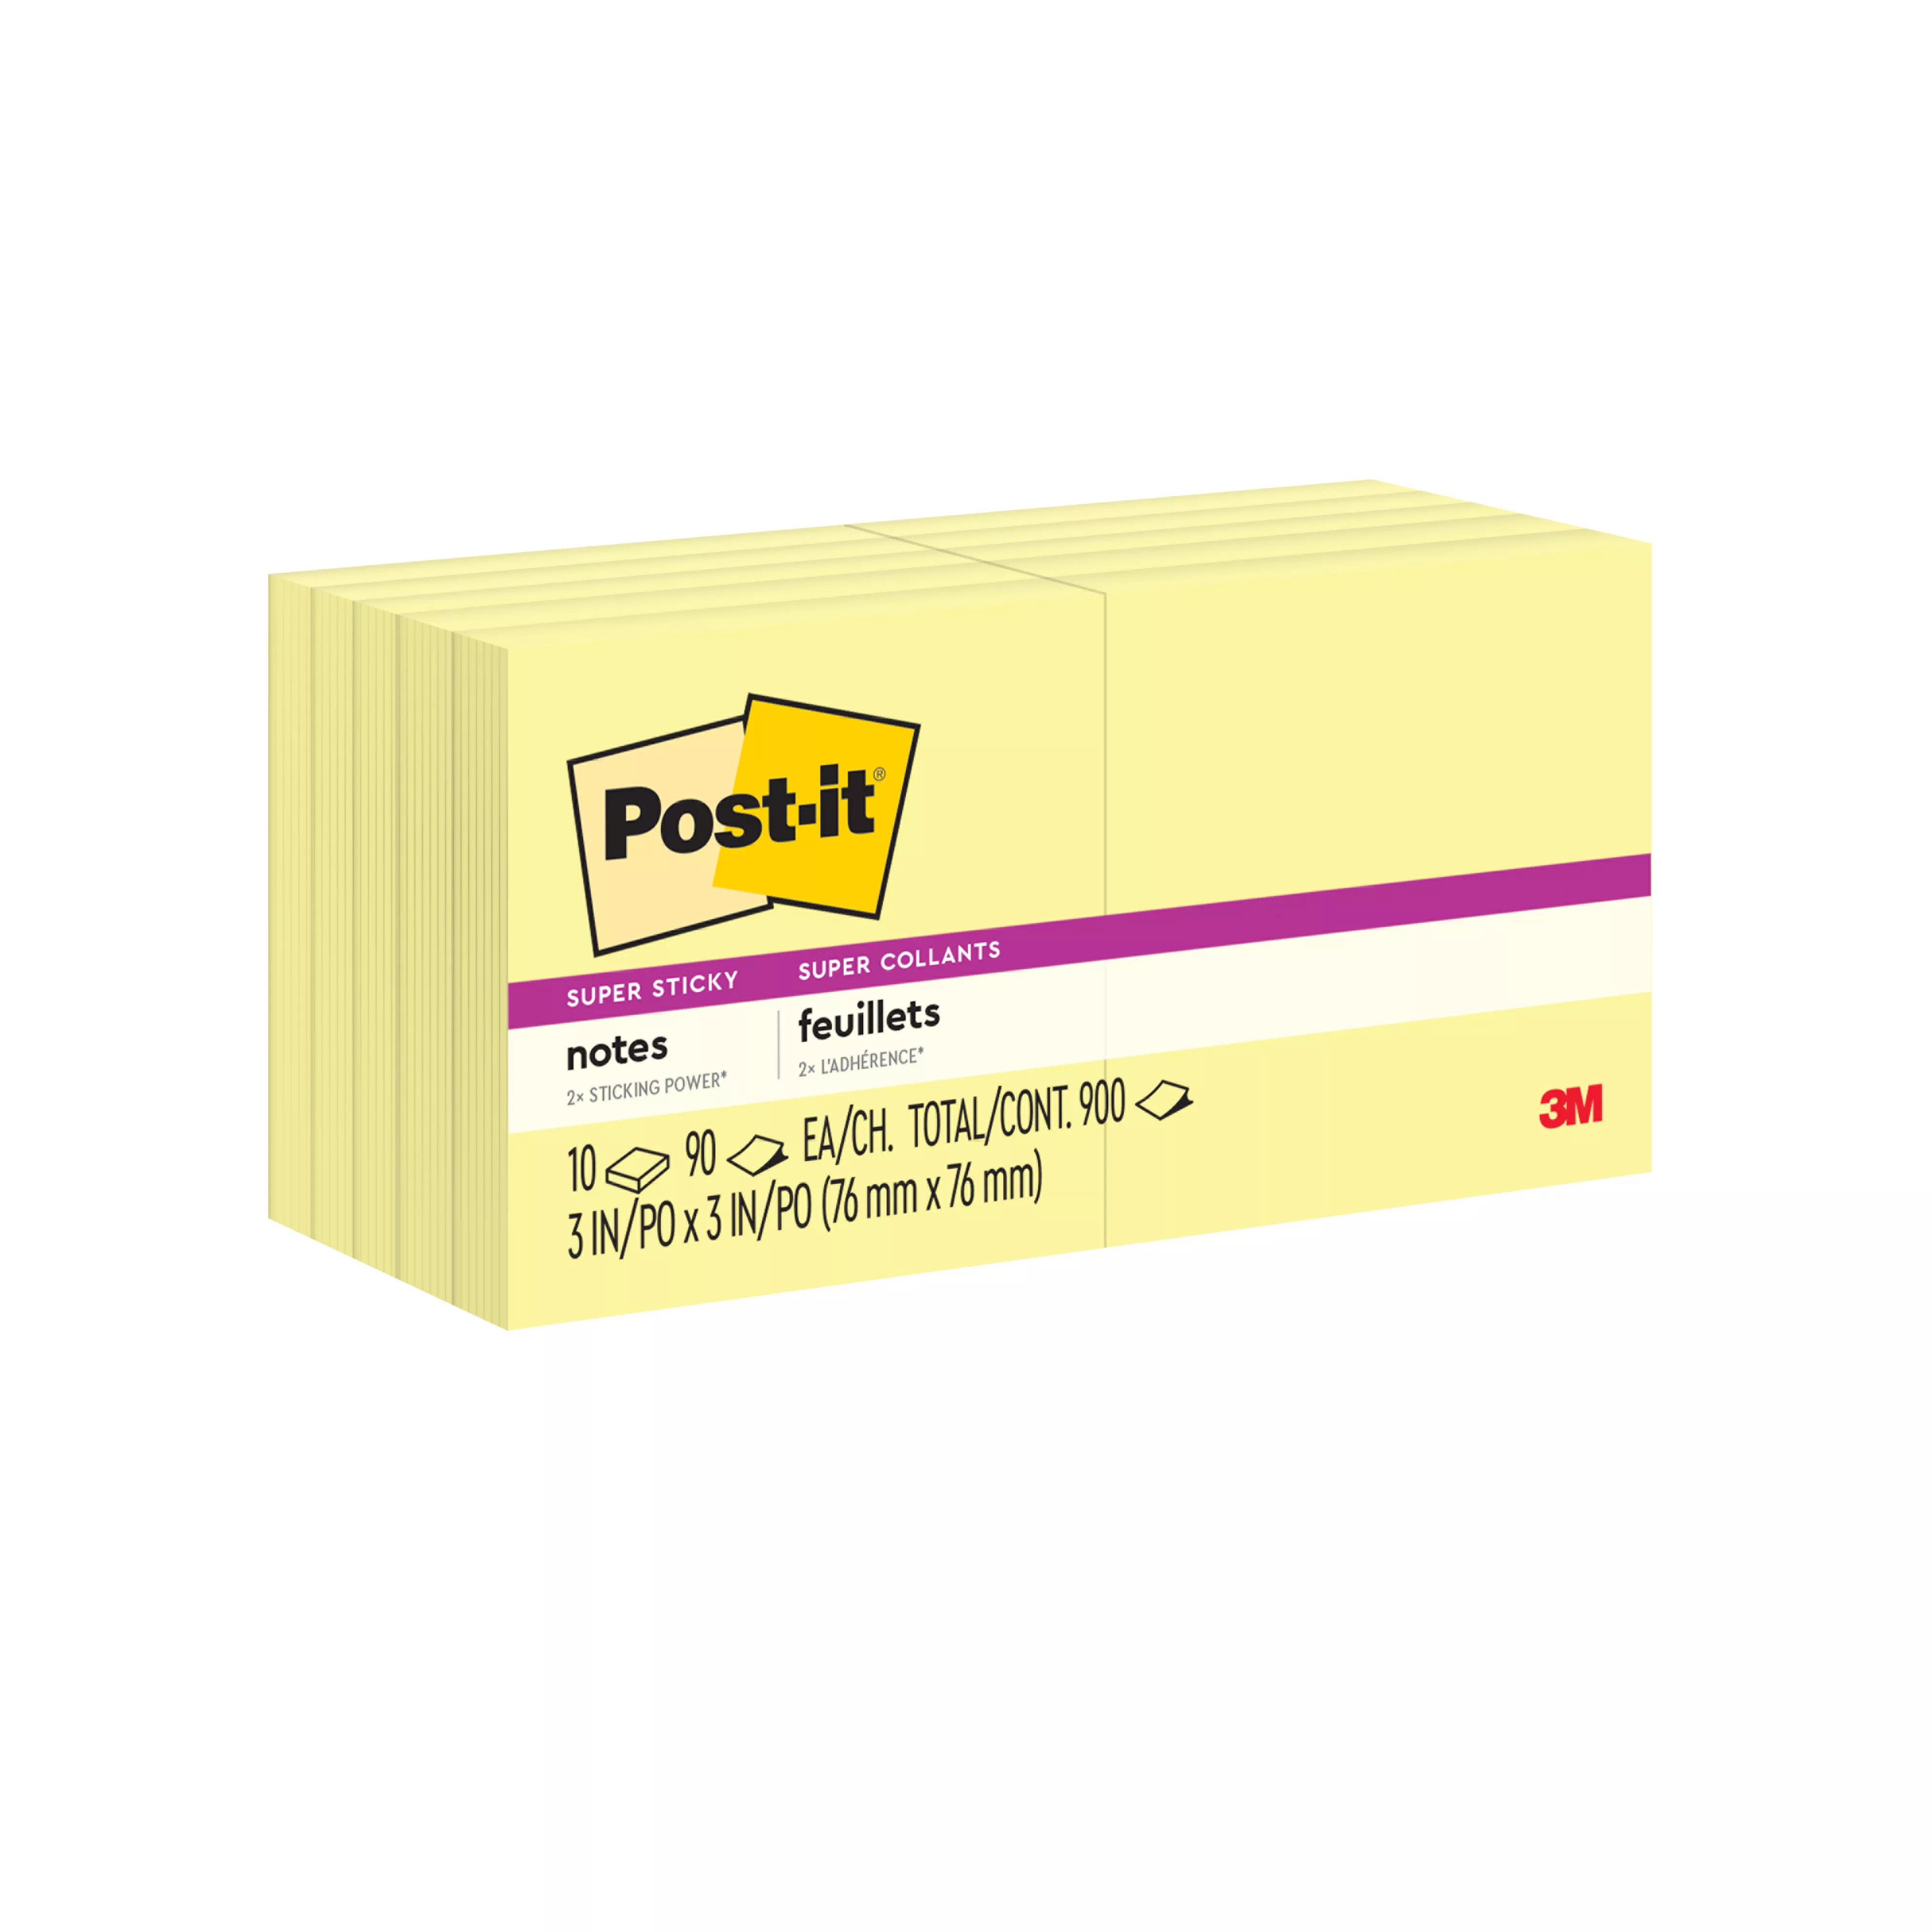 Post-it® Super Sticky Notes 654-10SSCY, 3 in x 3 in (7.62 cm x 7.62 cm)
Canary Yellow 10-pack